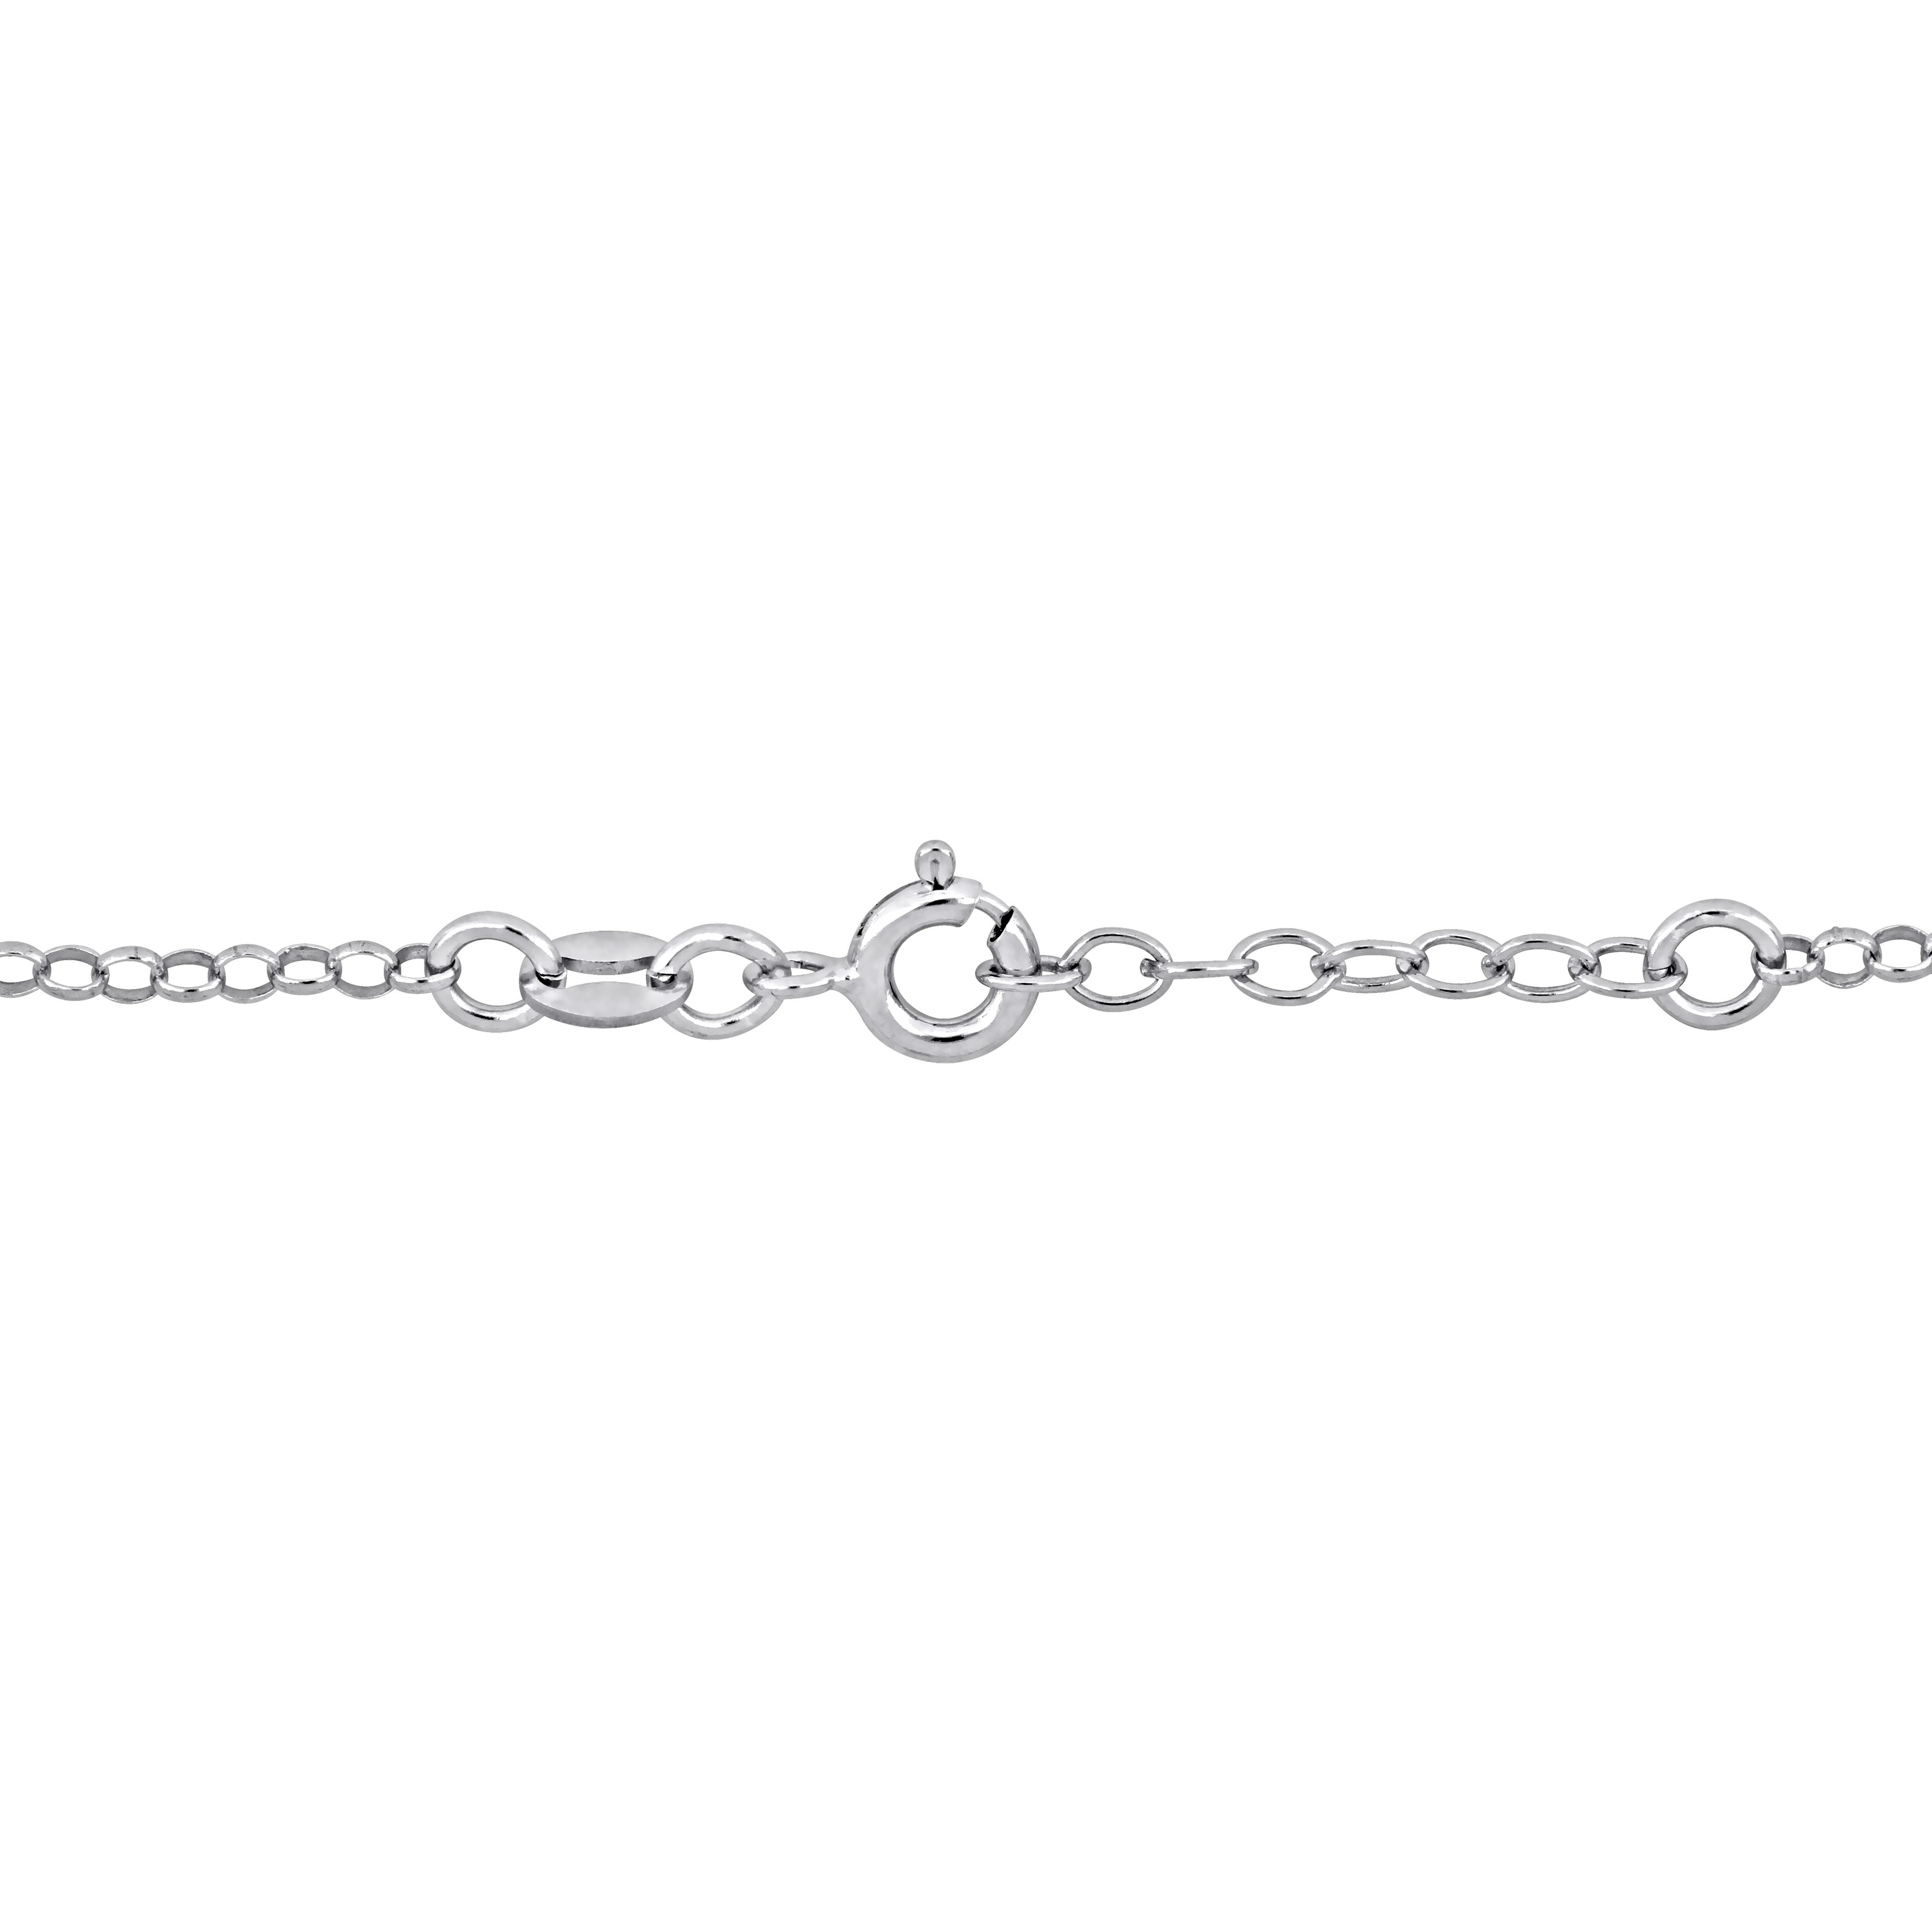 Dog Charm on 2mm Rolo Chain Station Bracelet in Sterling Silver - 6.5+0.5 in.